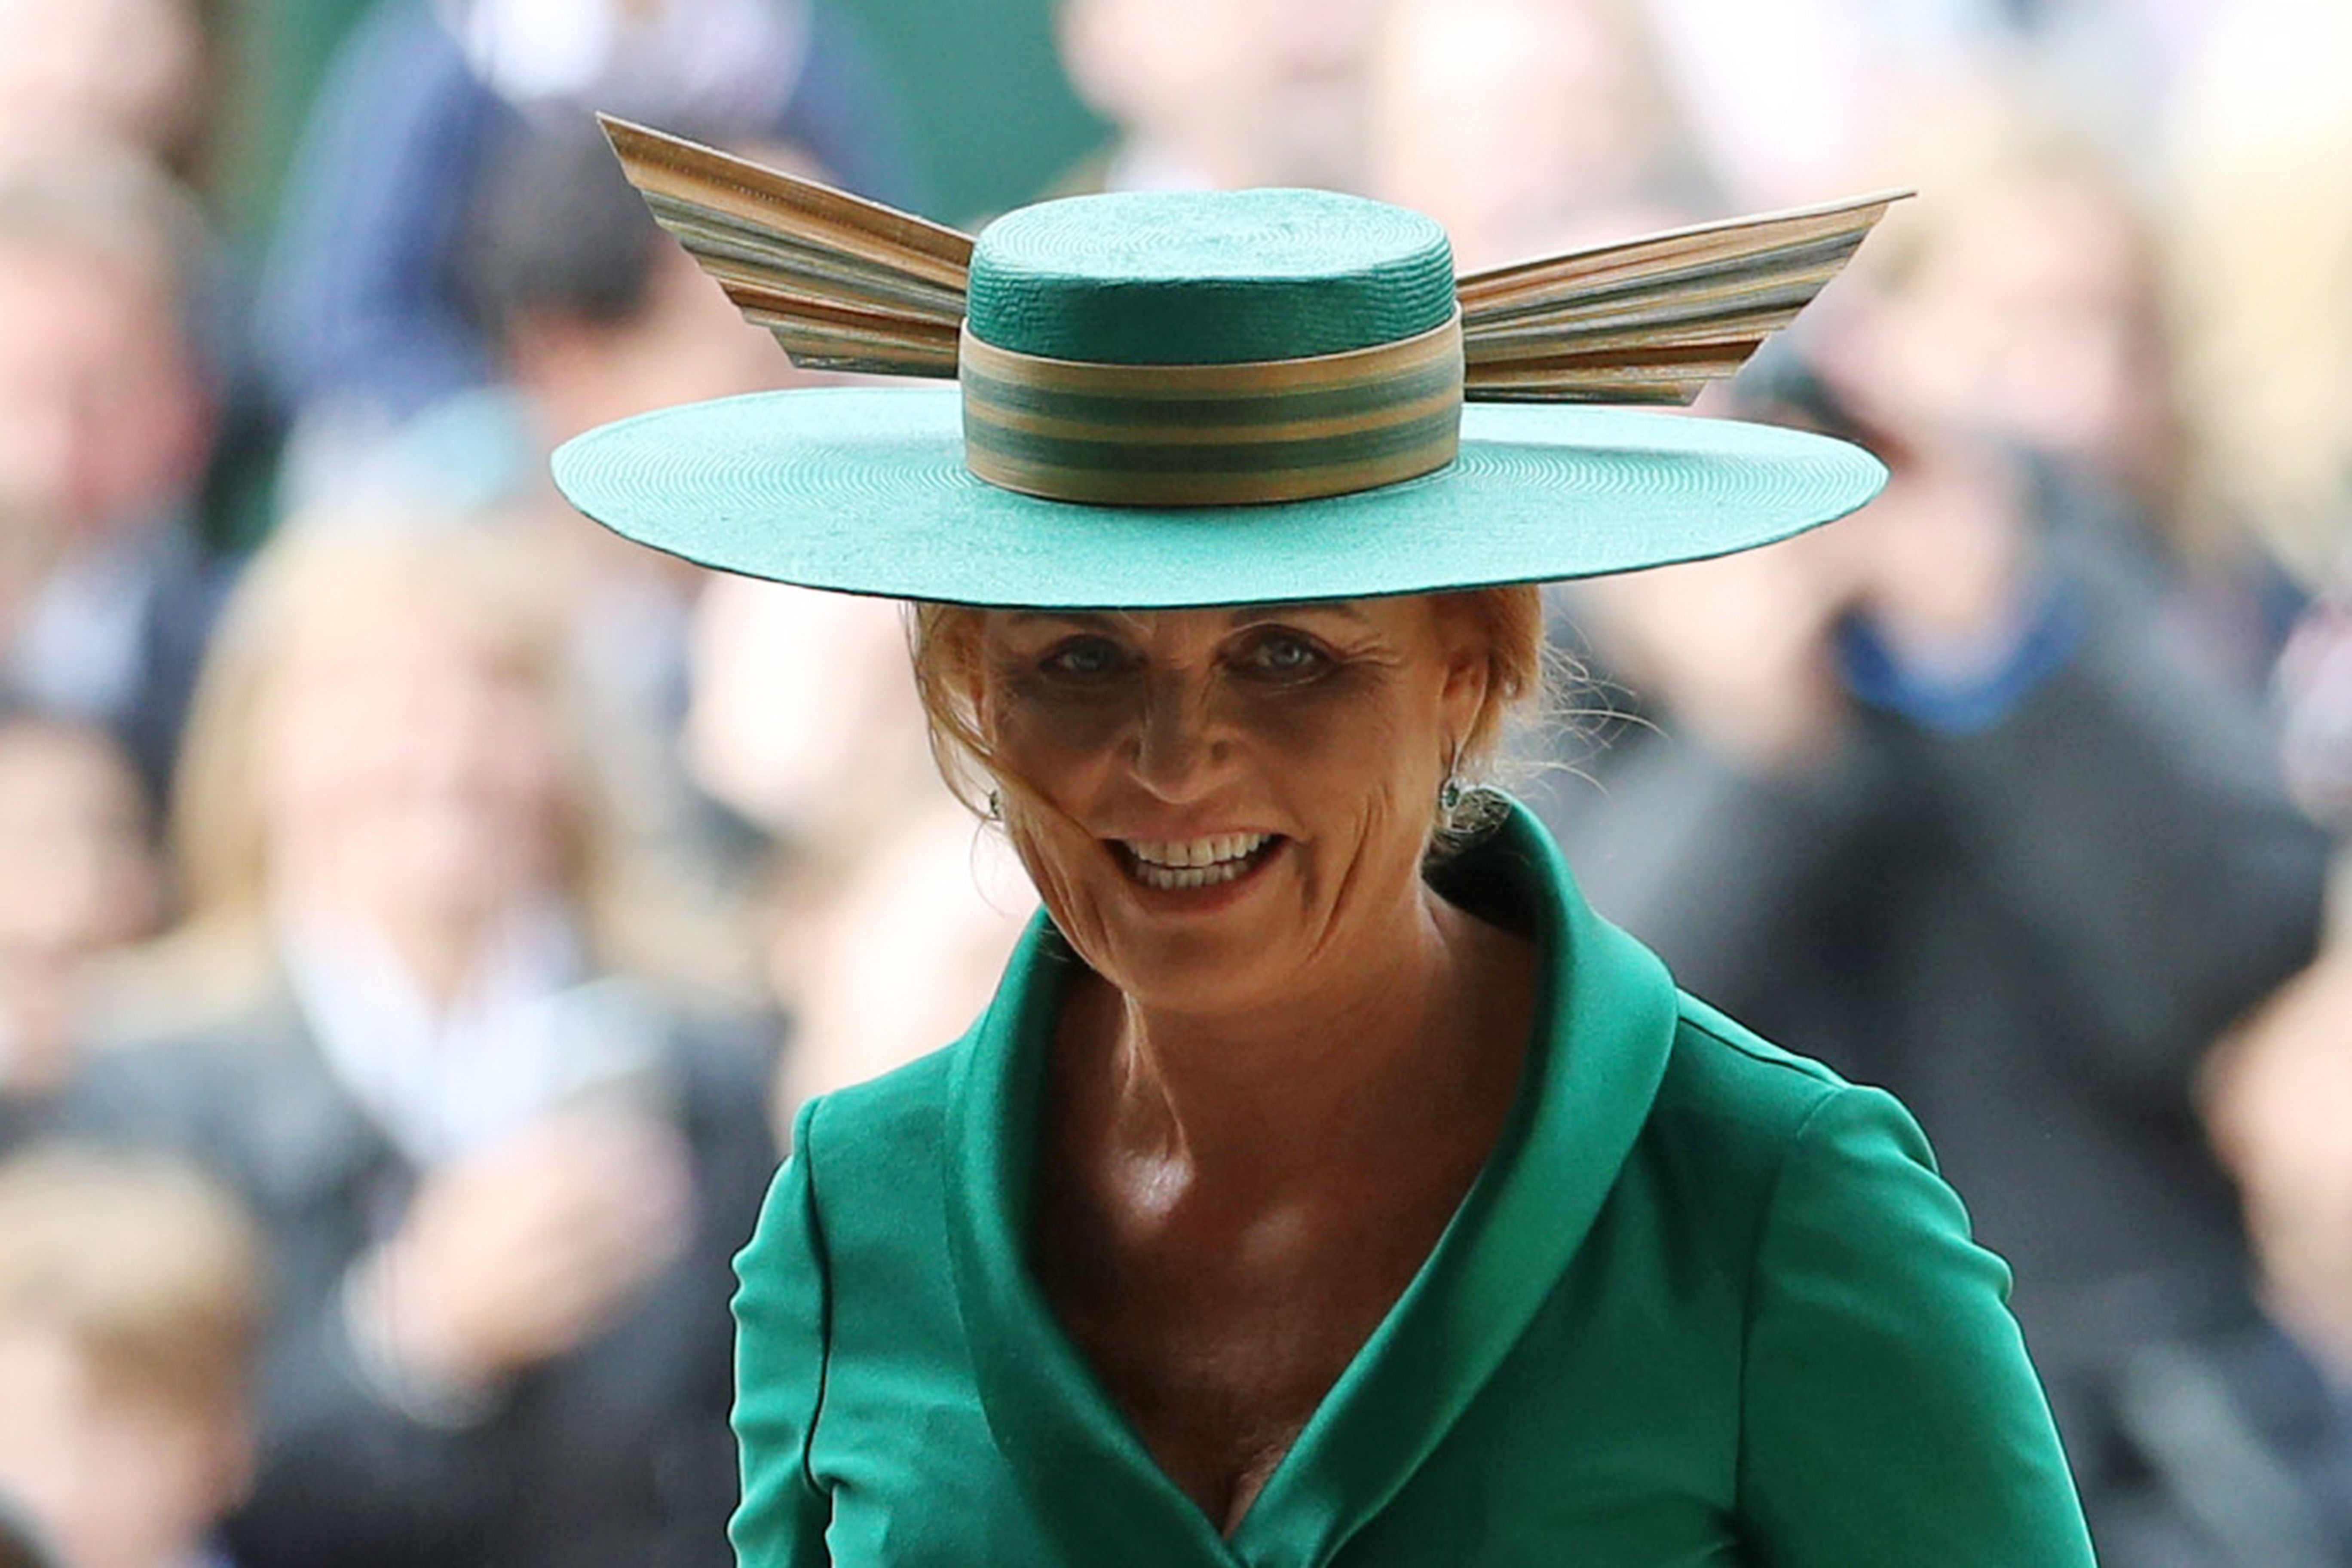 The Best Hats at Princess Eugenie's Wedding, Ranked!